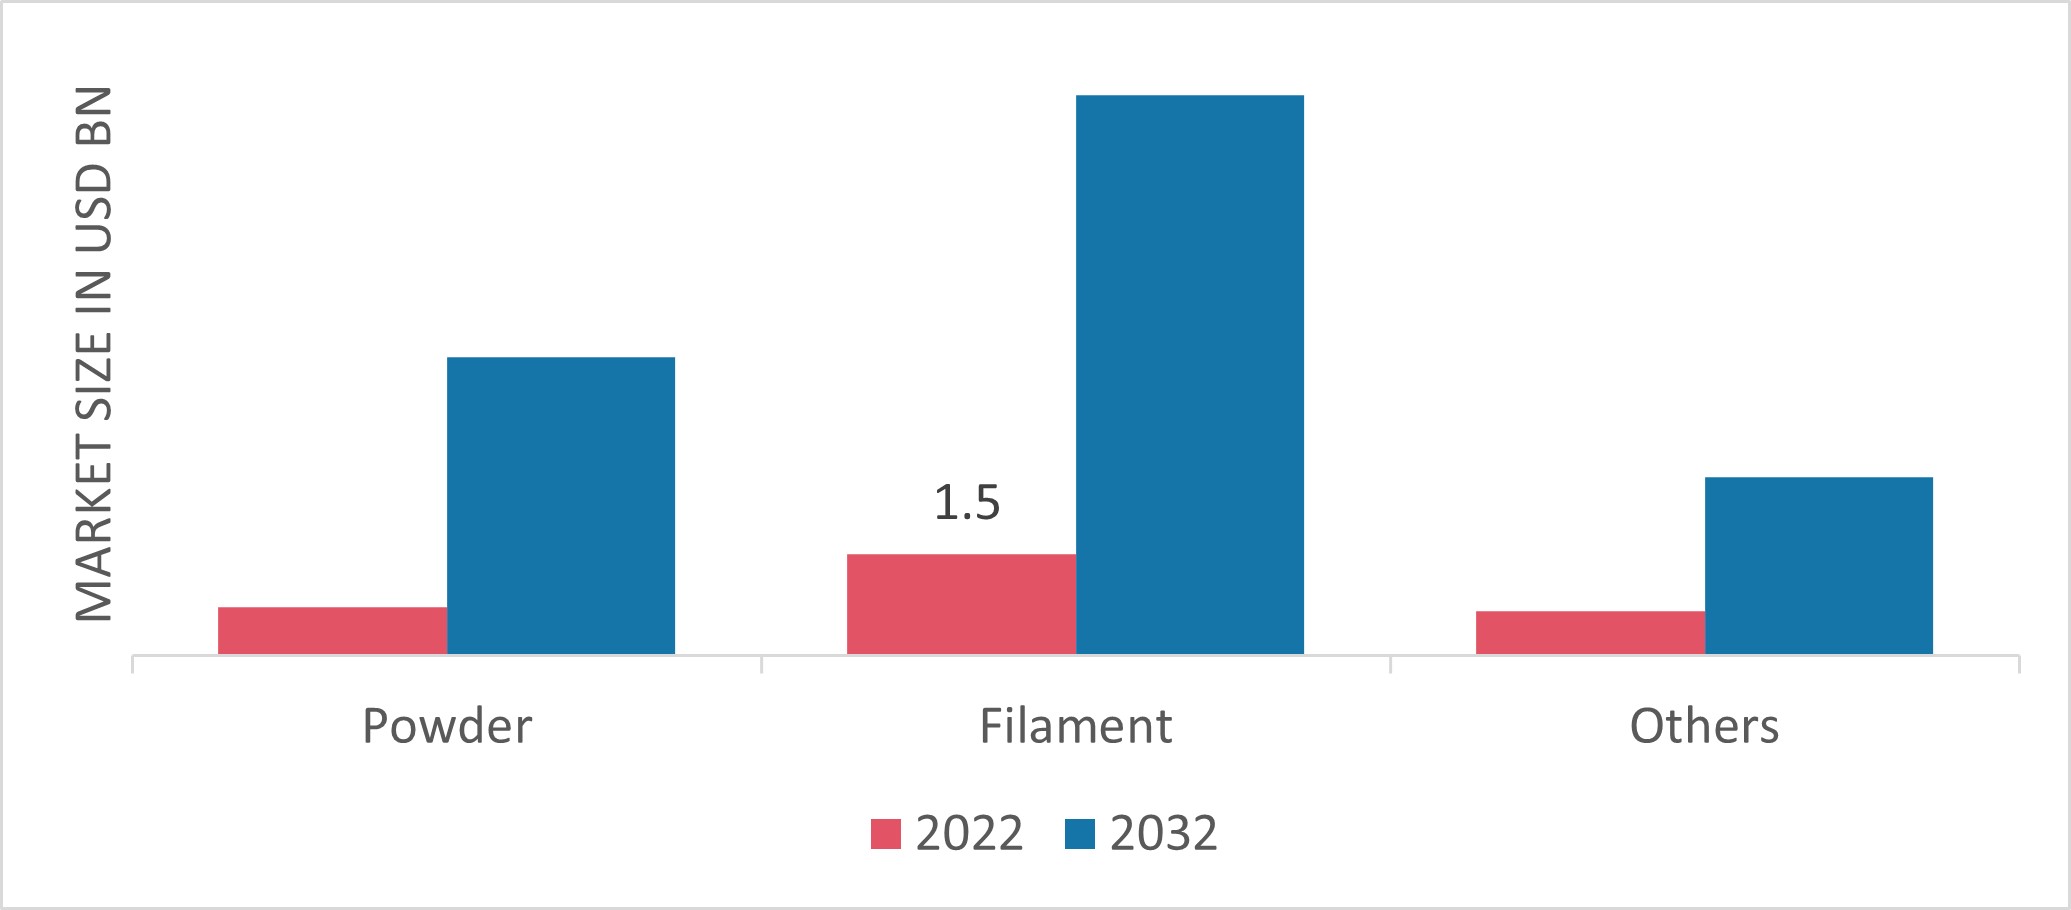 3D Printing Materials Market, by Form, 2022 & 2032